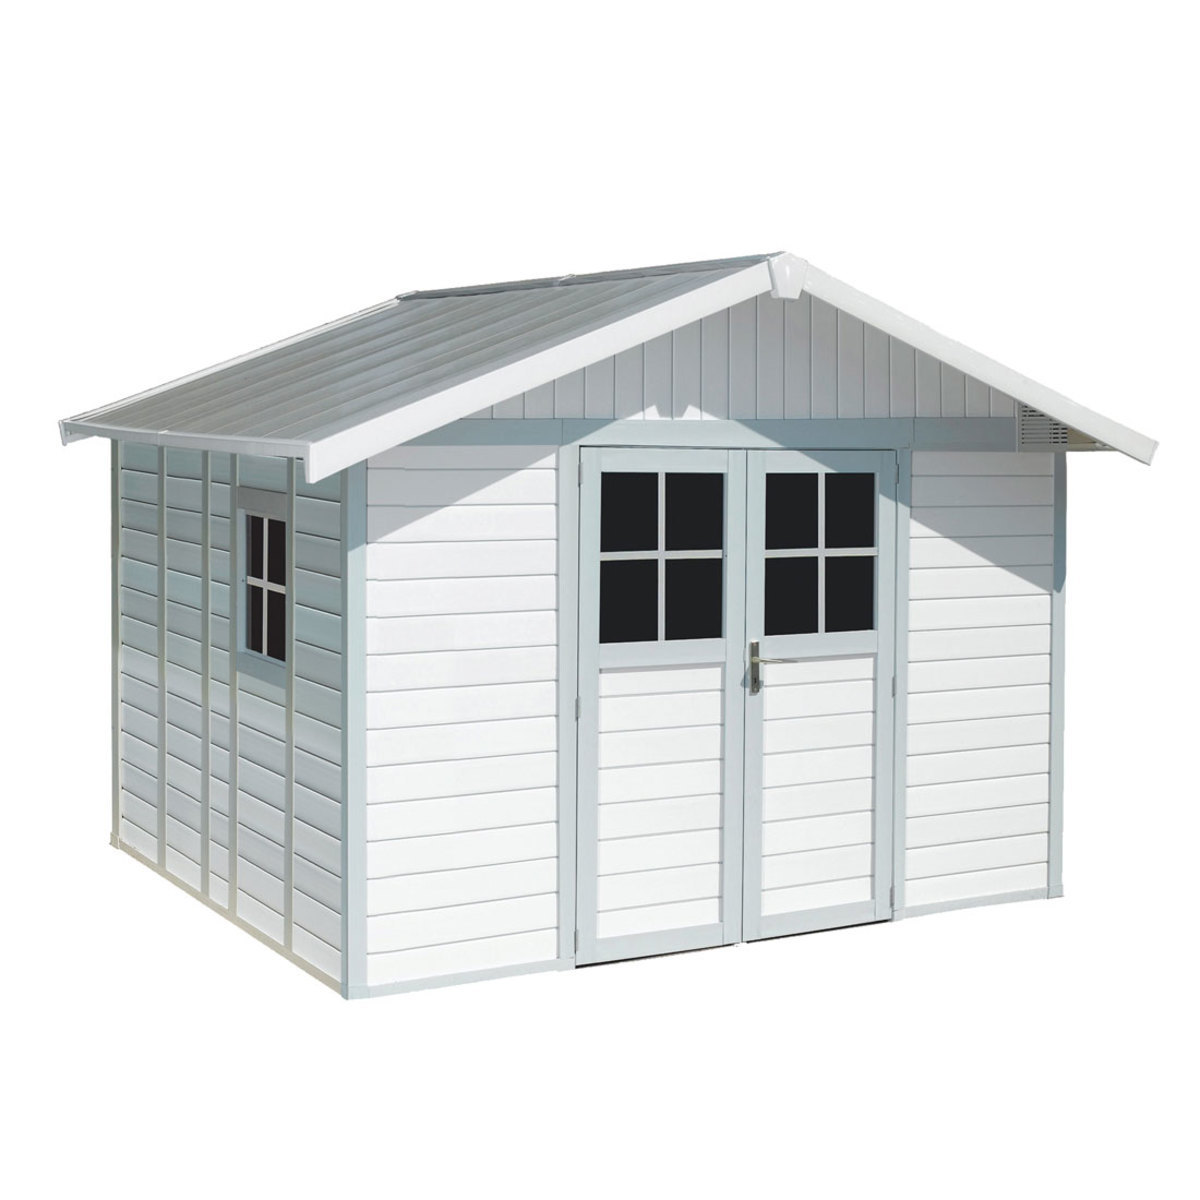 Grosfillex Deco 10ft 2" x 11ft 5" (3.1 x 3.5m) Shed in Blue/White  - Model Deco 11